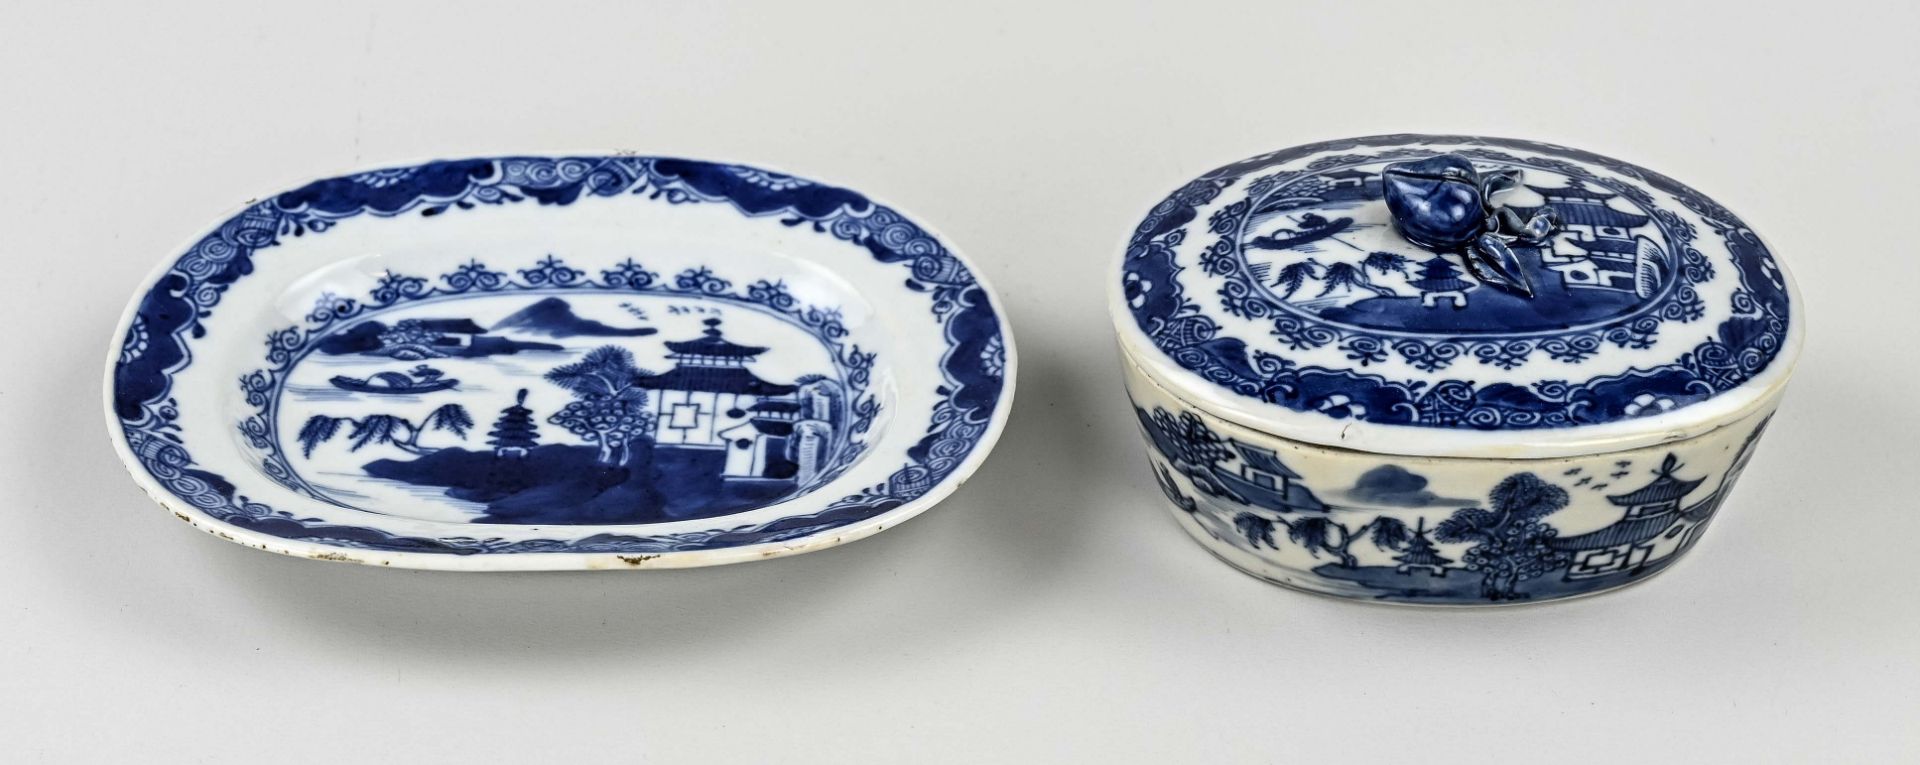 18th century Chinese lidded tureen + saucer - Image 2 of 3